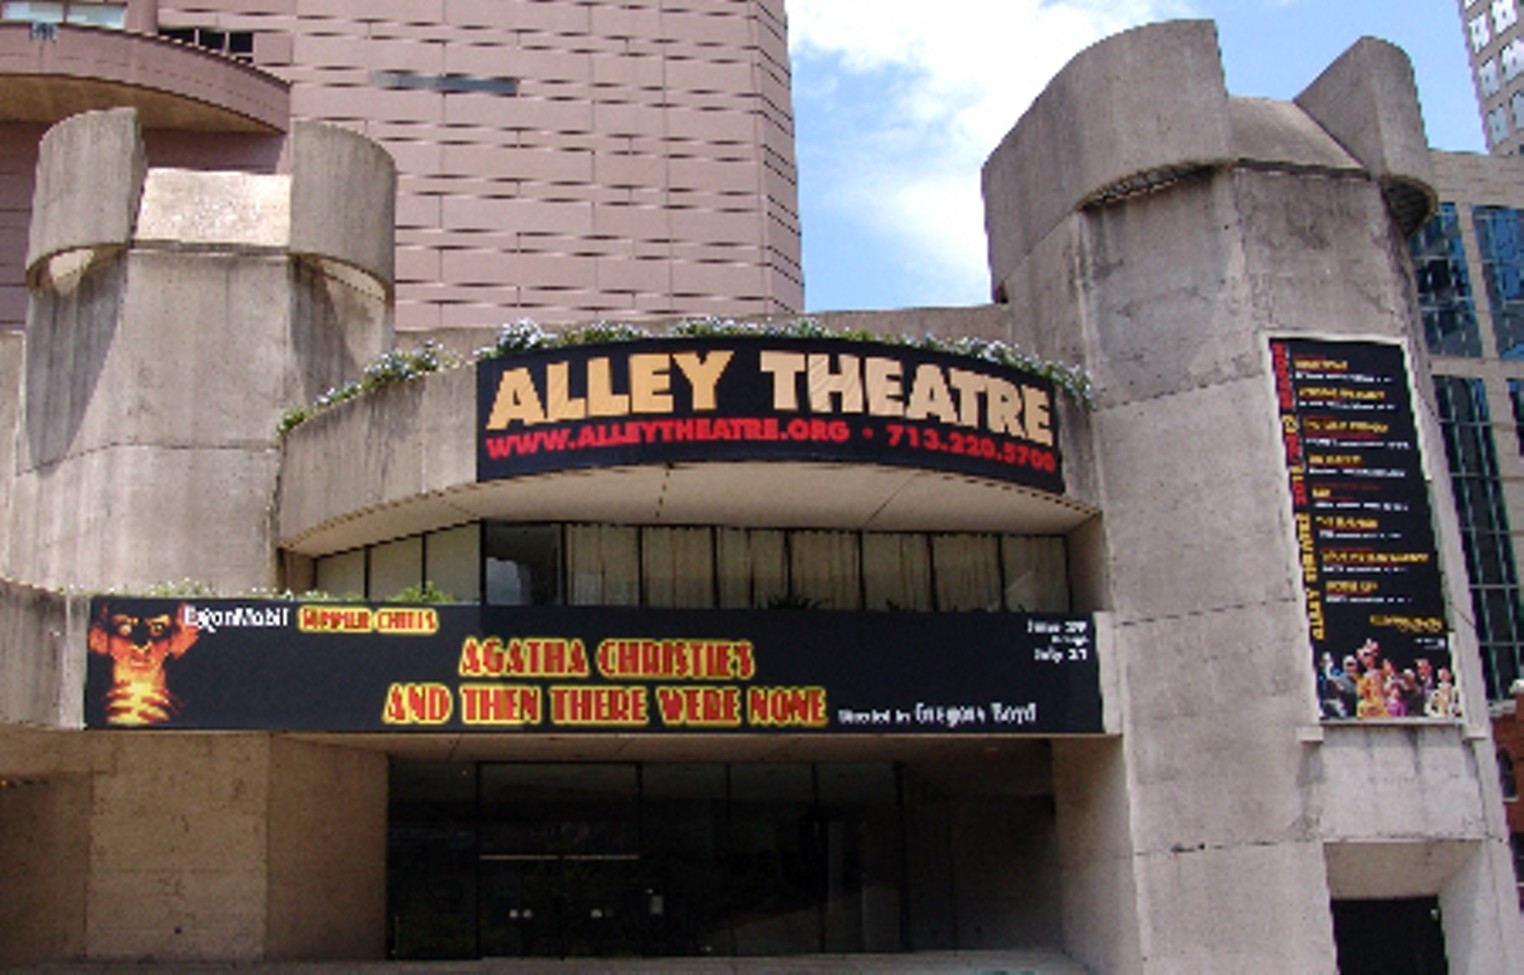 Best Theater Season 2006 The Alley Theatre Best of Houston® Best Restaurants, Bars, Clubs, Music and Stores in Houston Houston Press photo